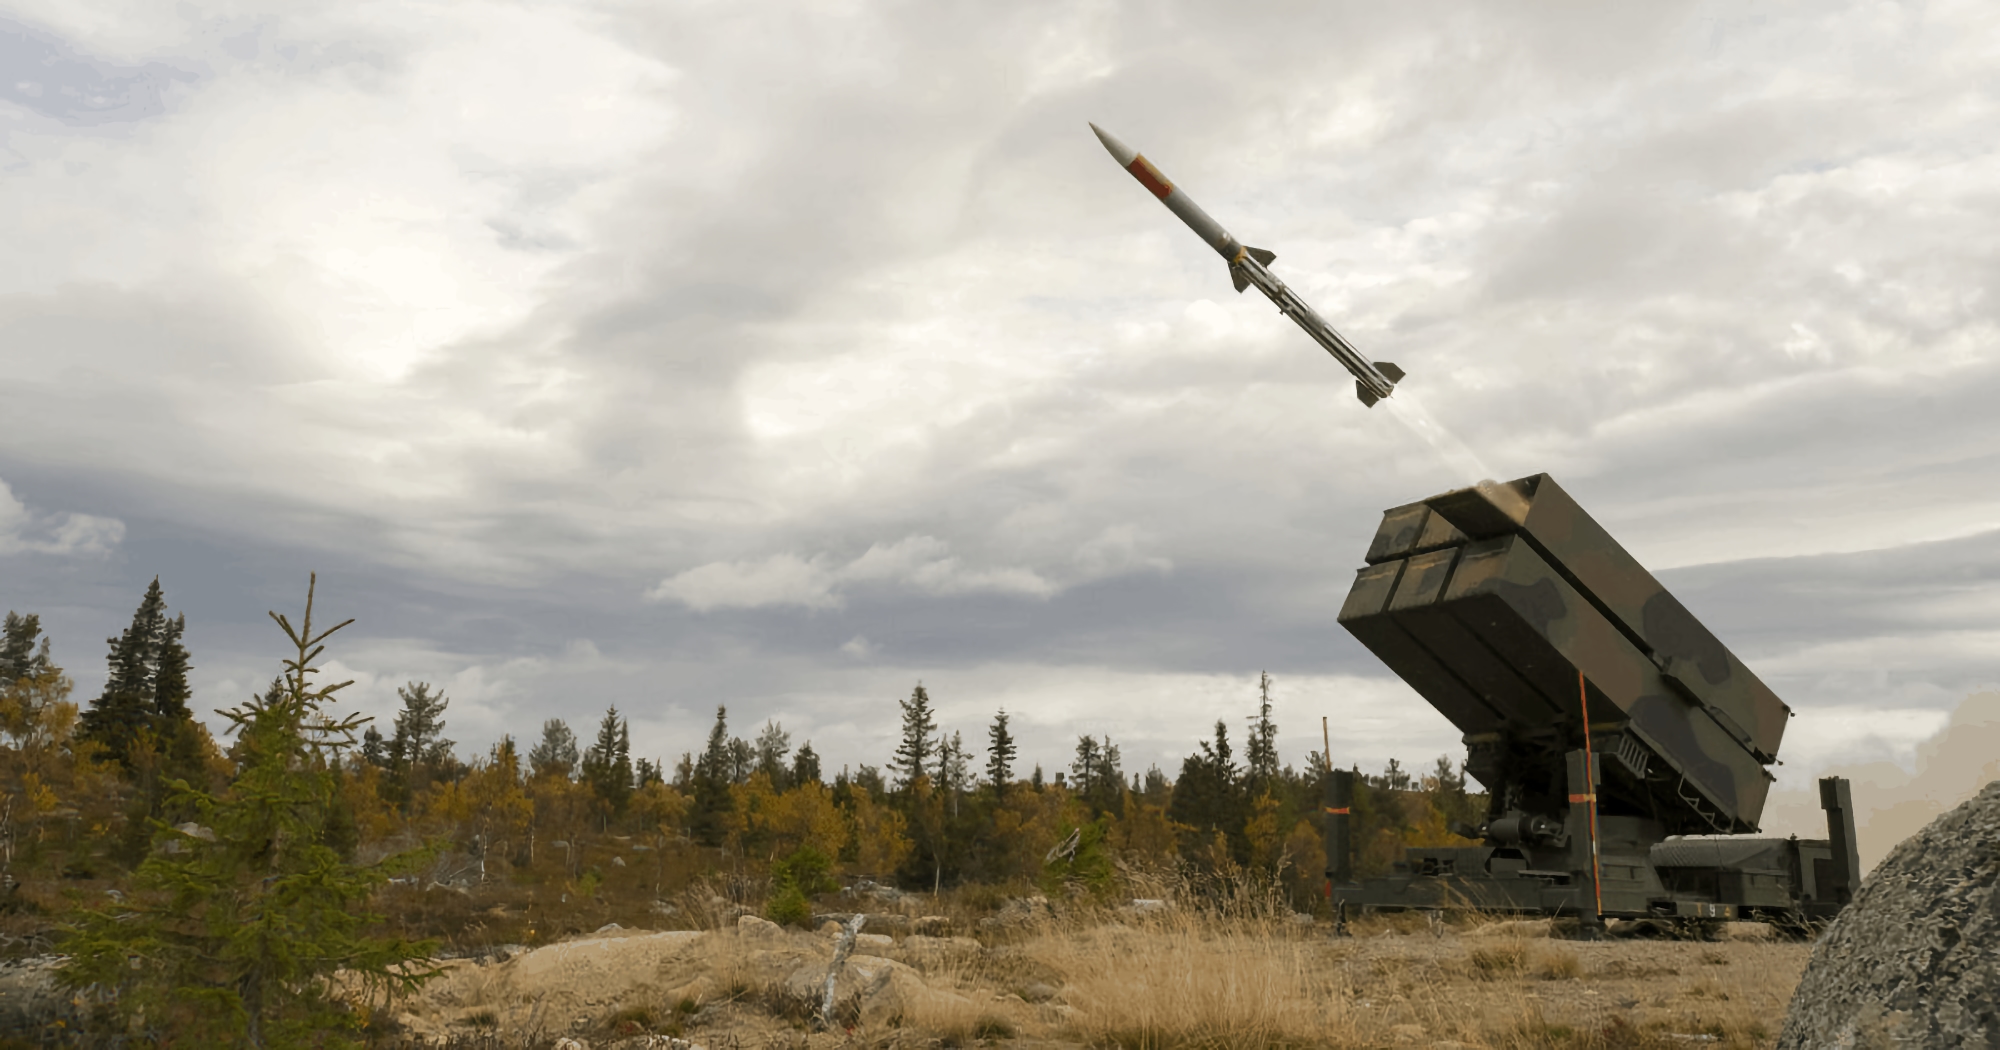 Ukraine will receive two NASAMS batteries, not just two surface-to-air missile systems